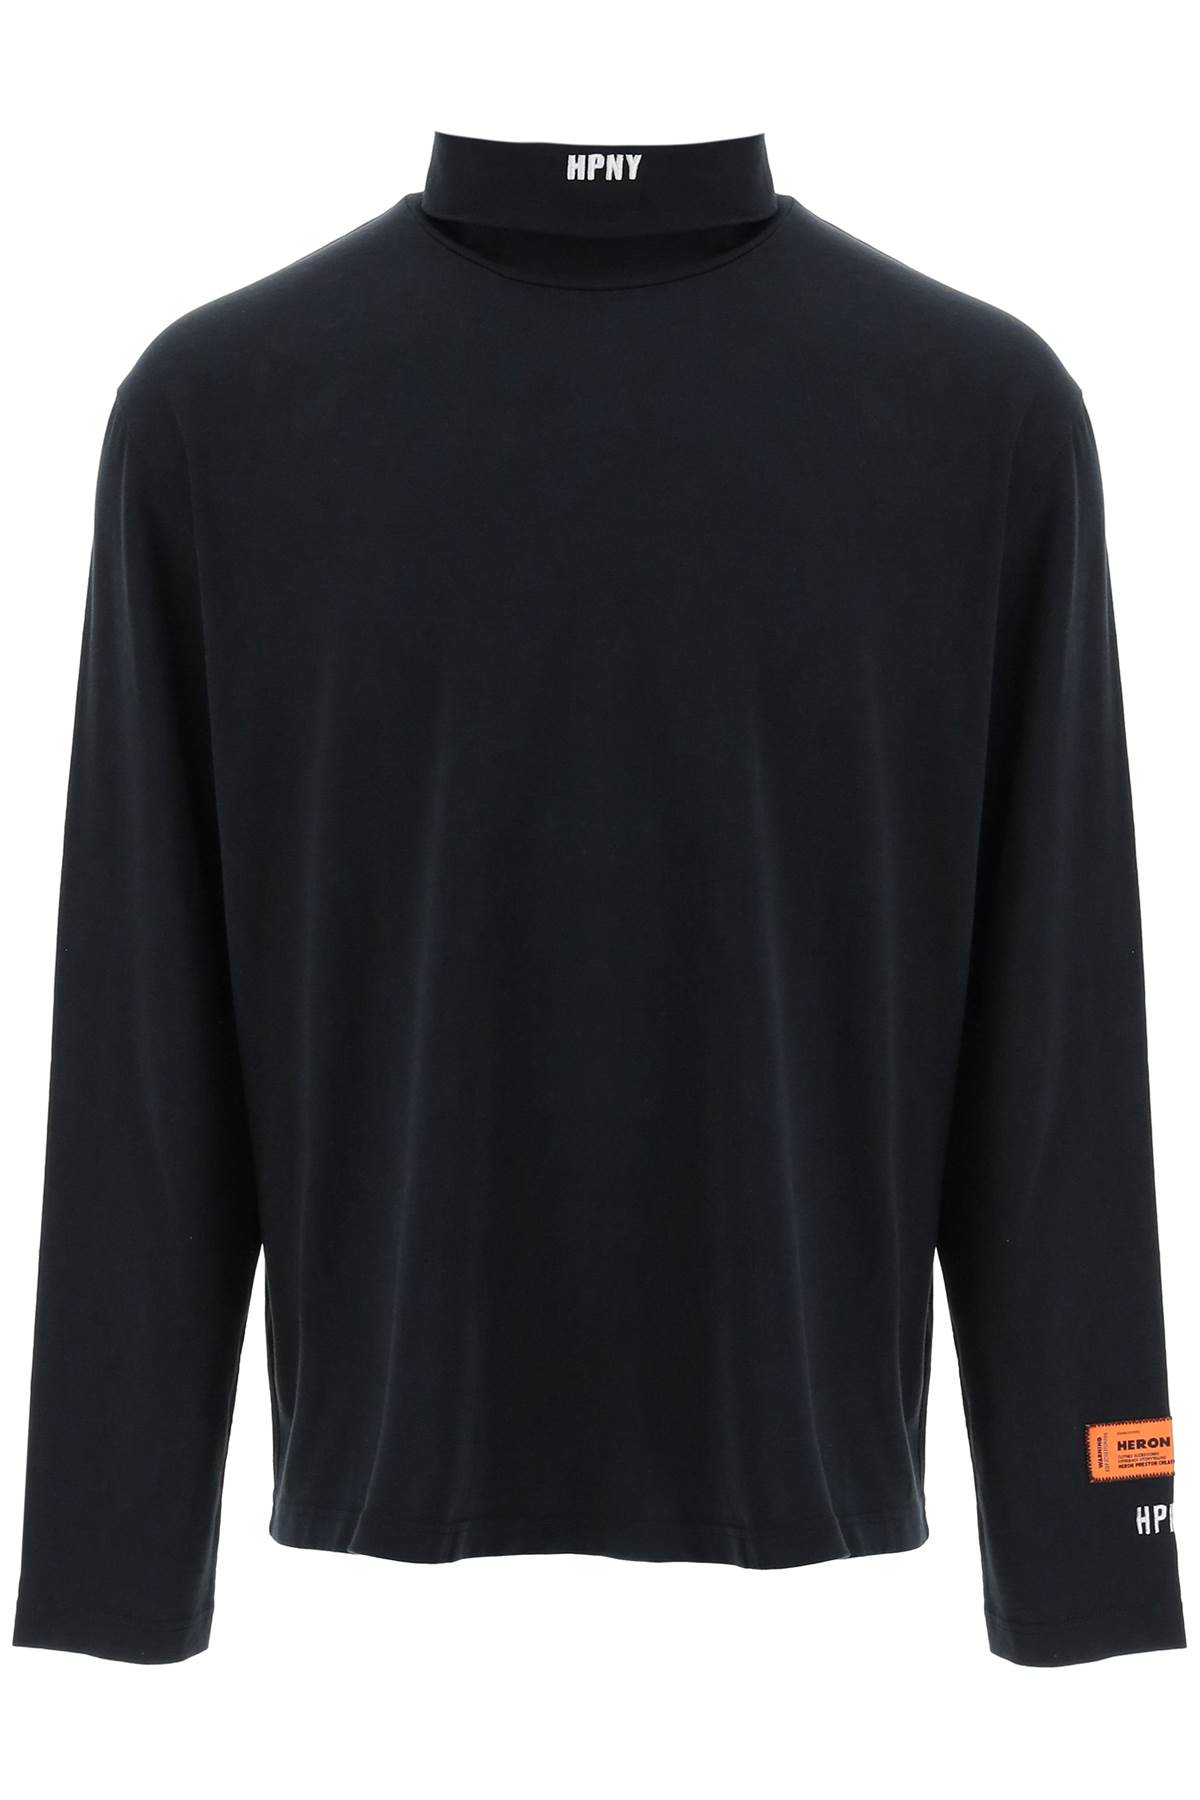 Heron Preston Hpny Embroidered Long Sleeve T-shirt In Black